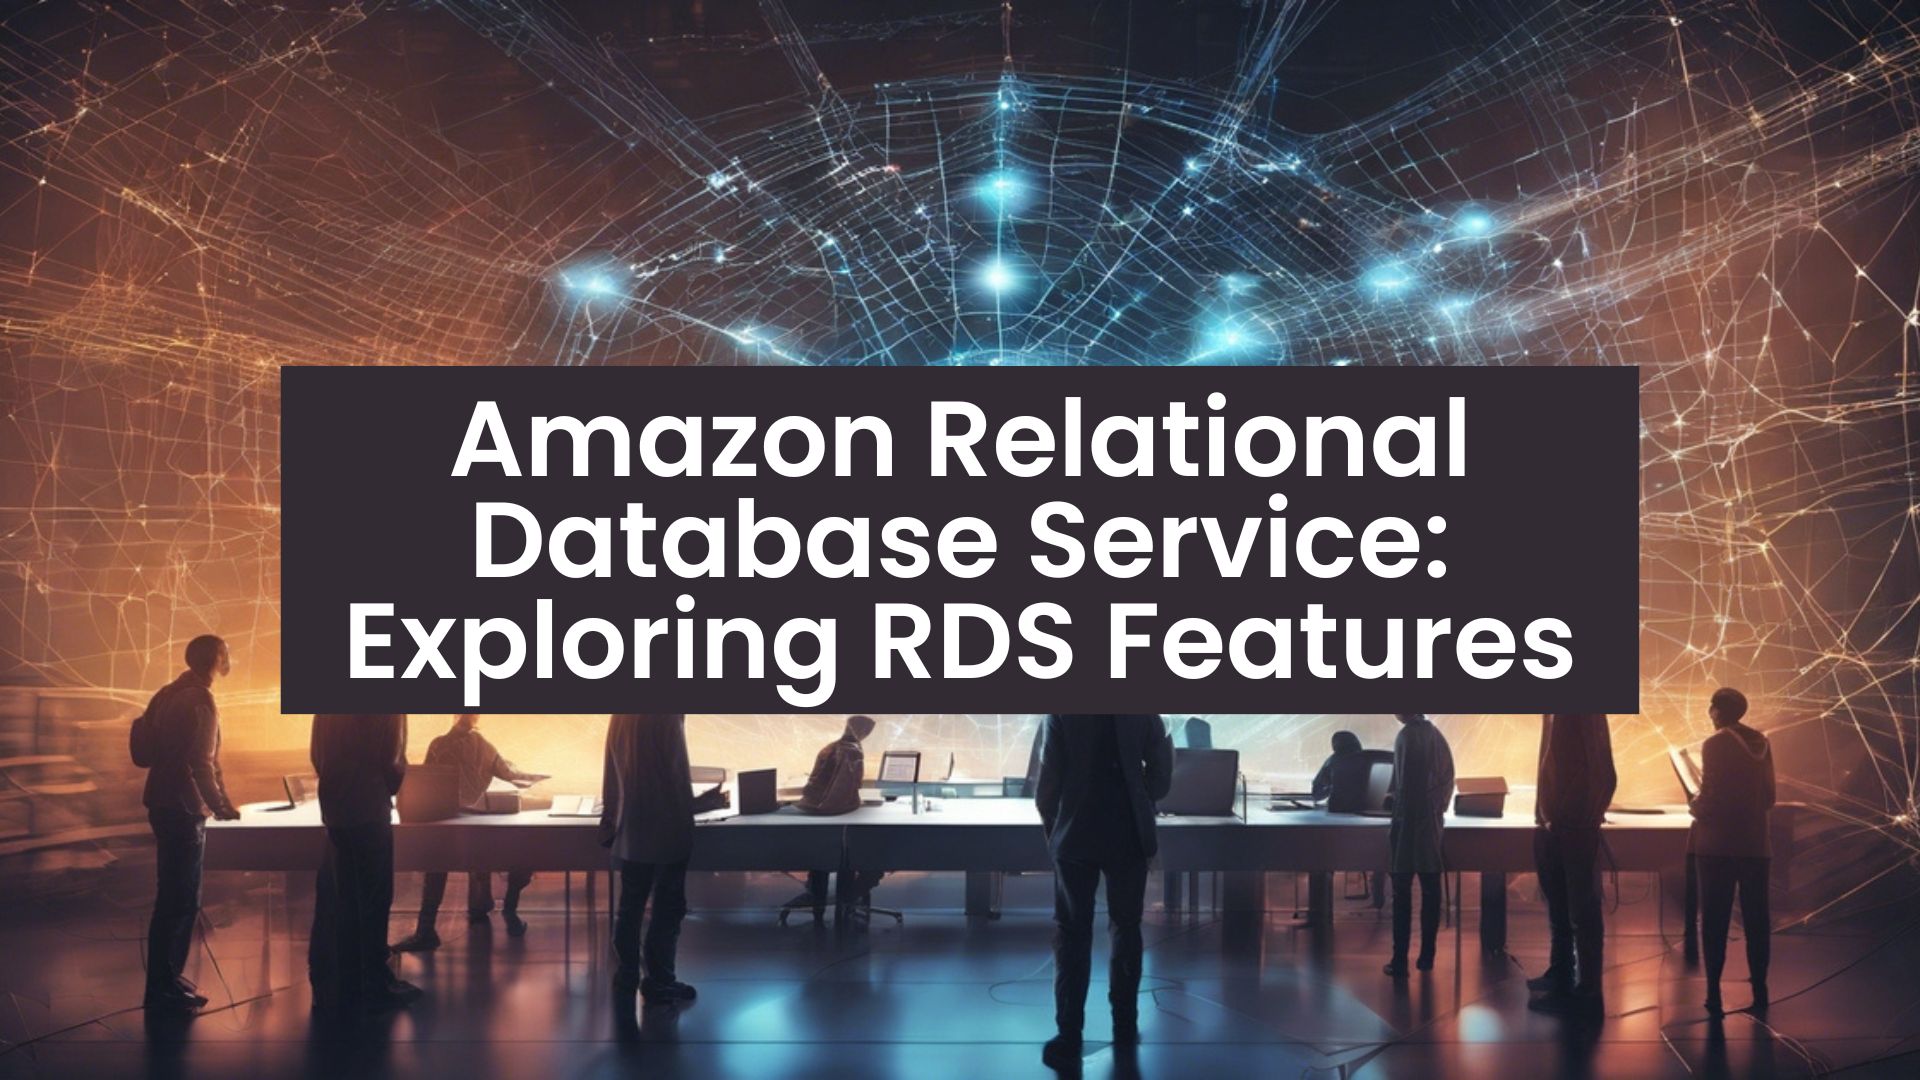 Amazon Relational Database Service Exploring RDS Features